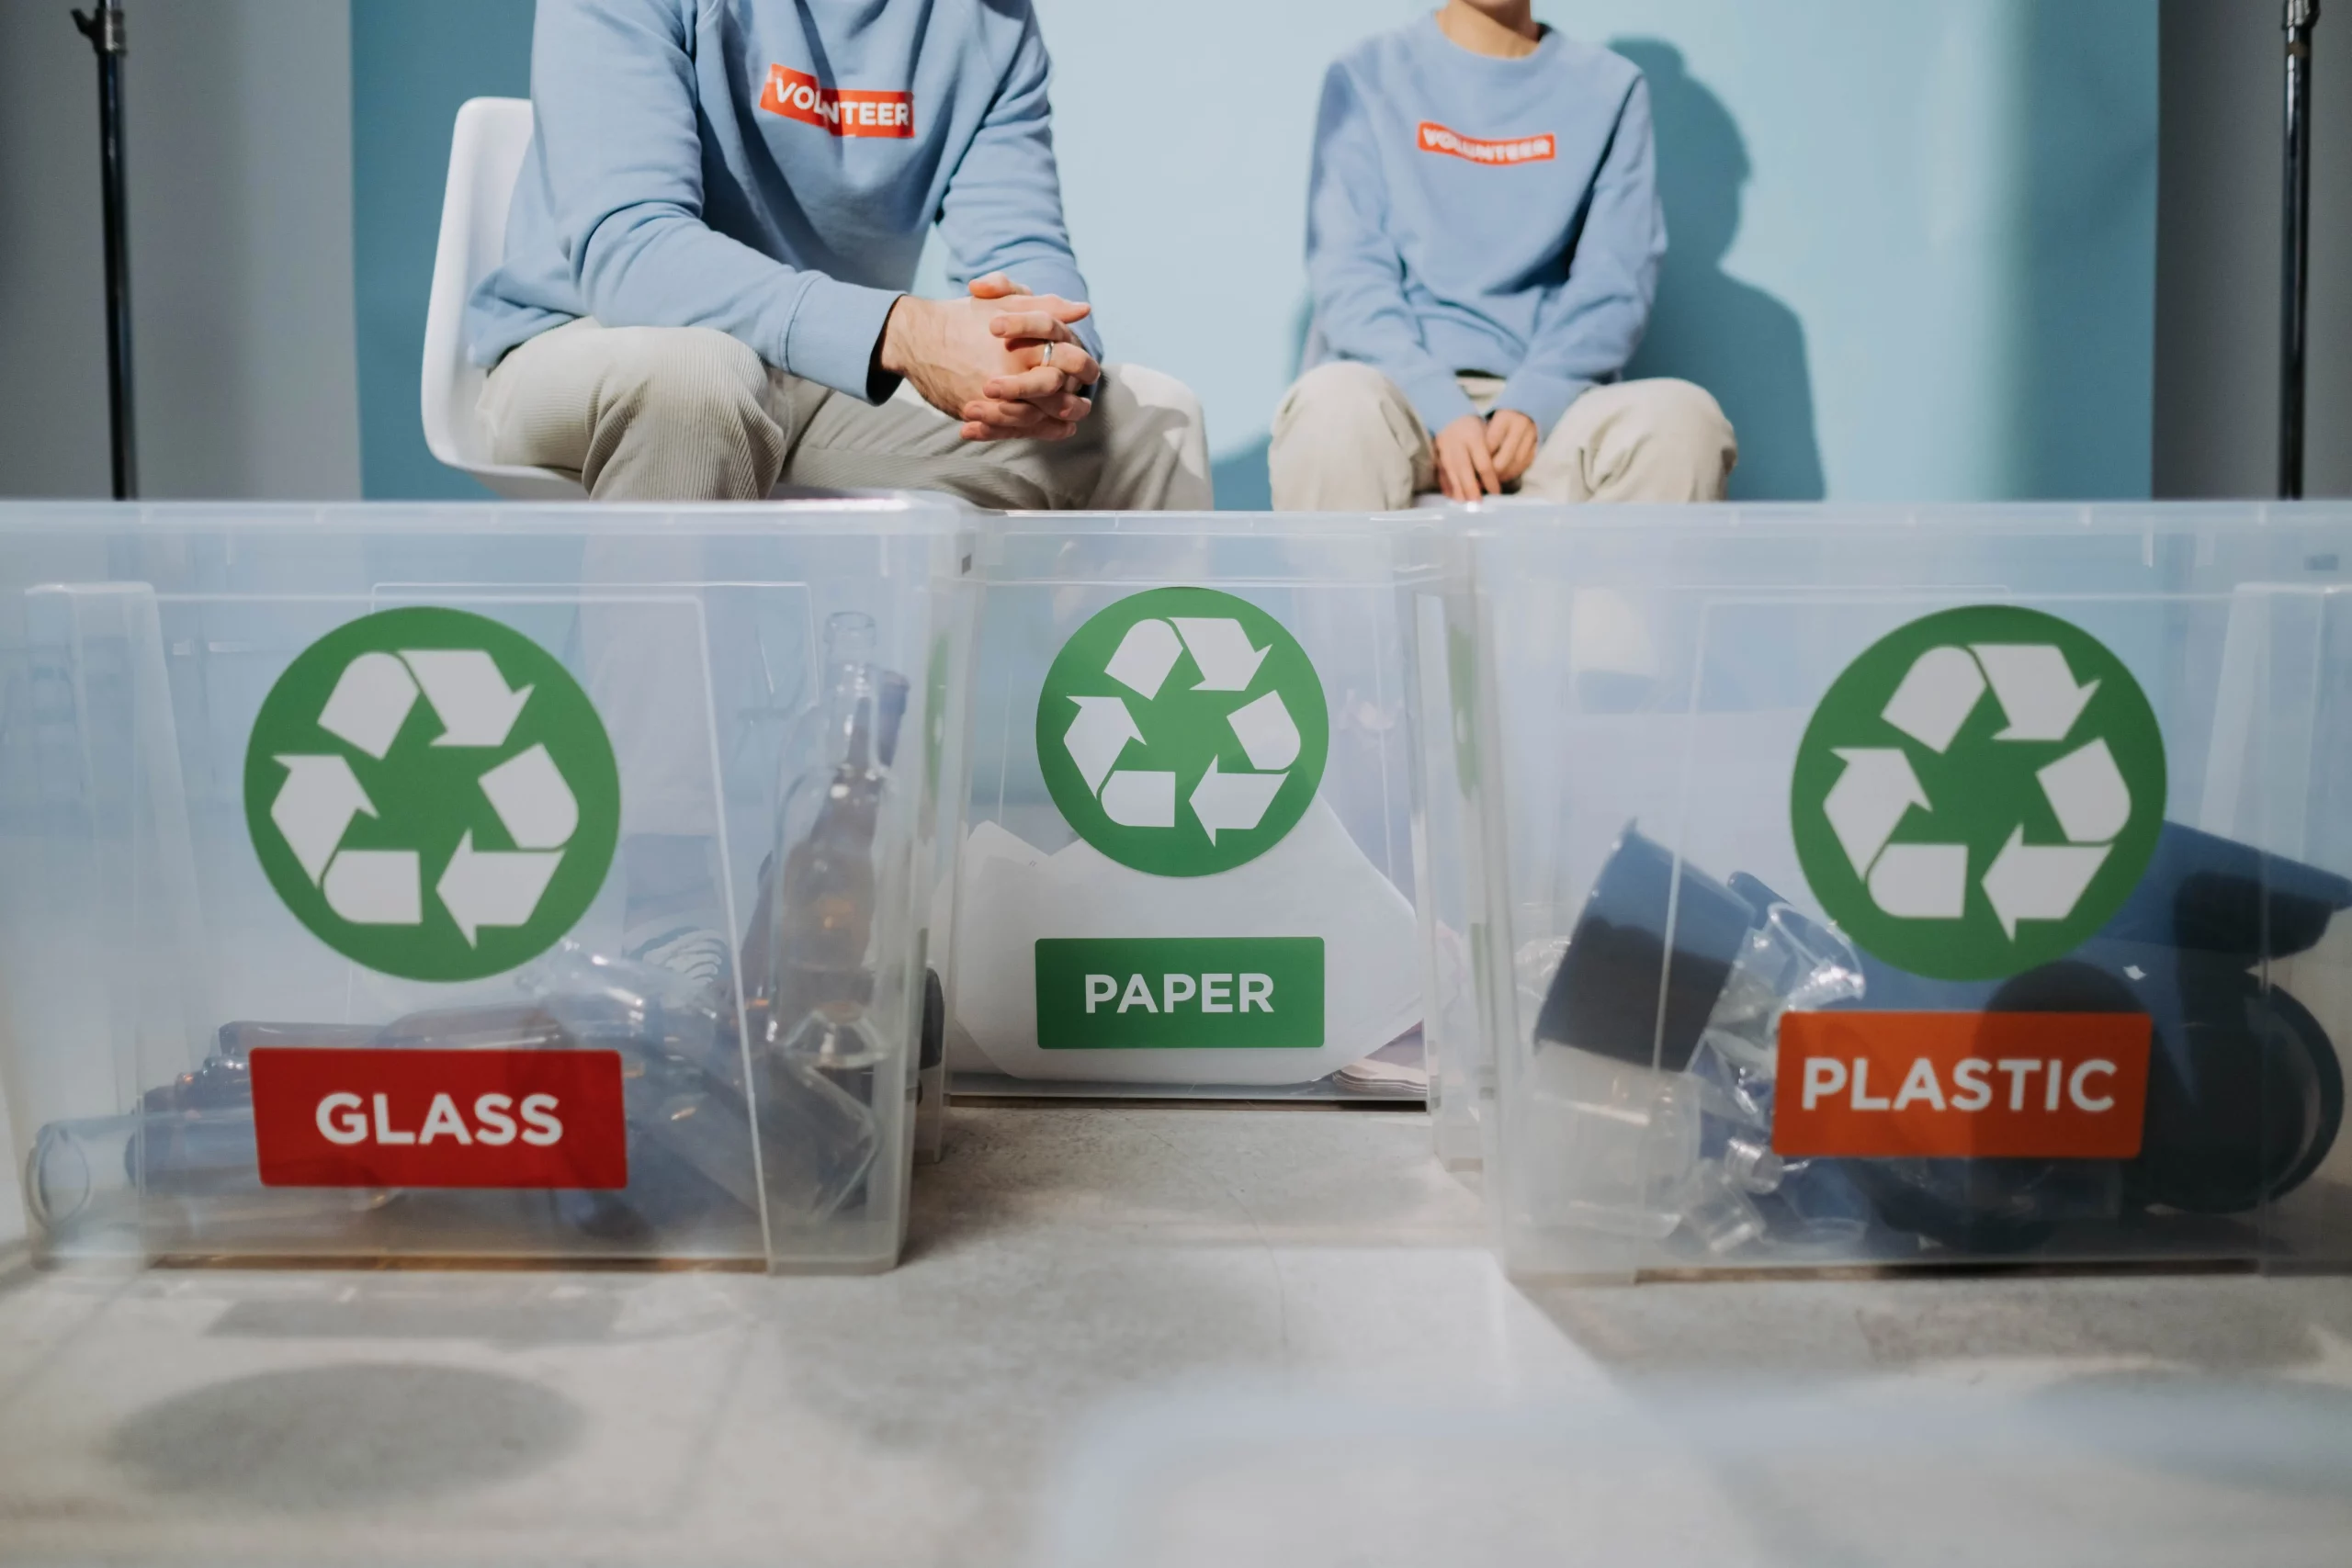 Image of three boxes for sorting different categories of waste.